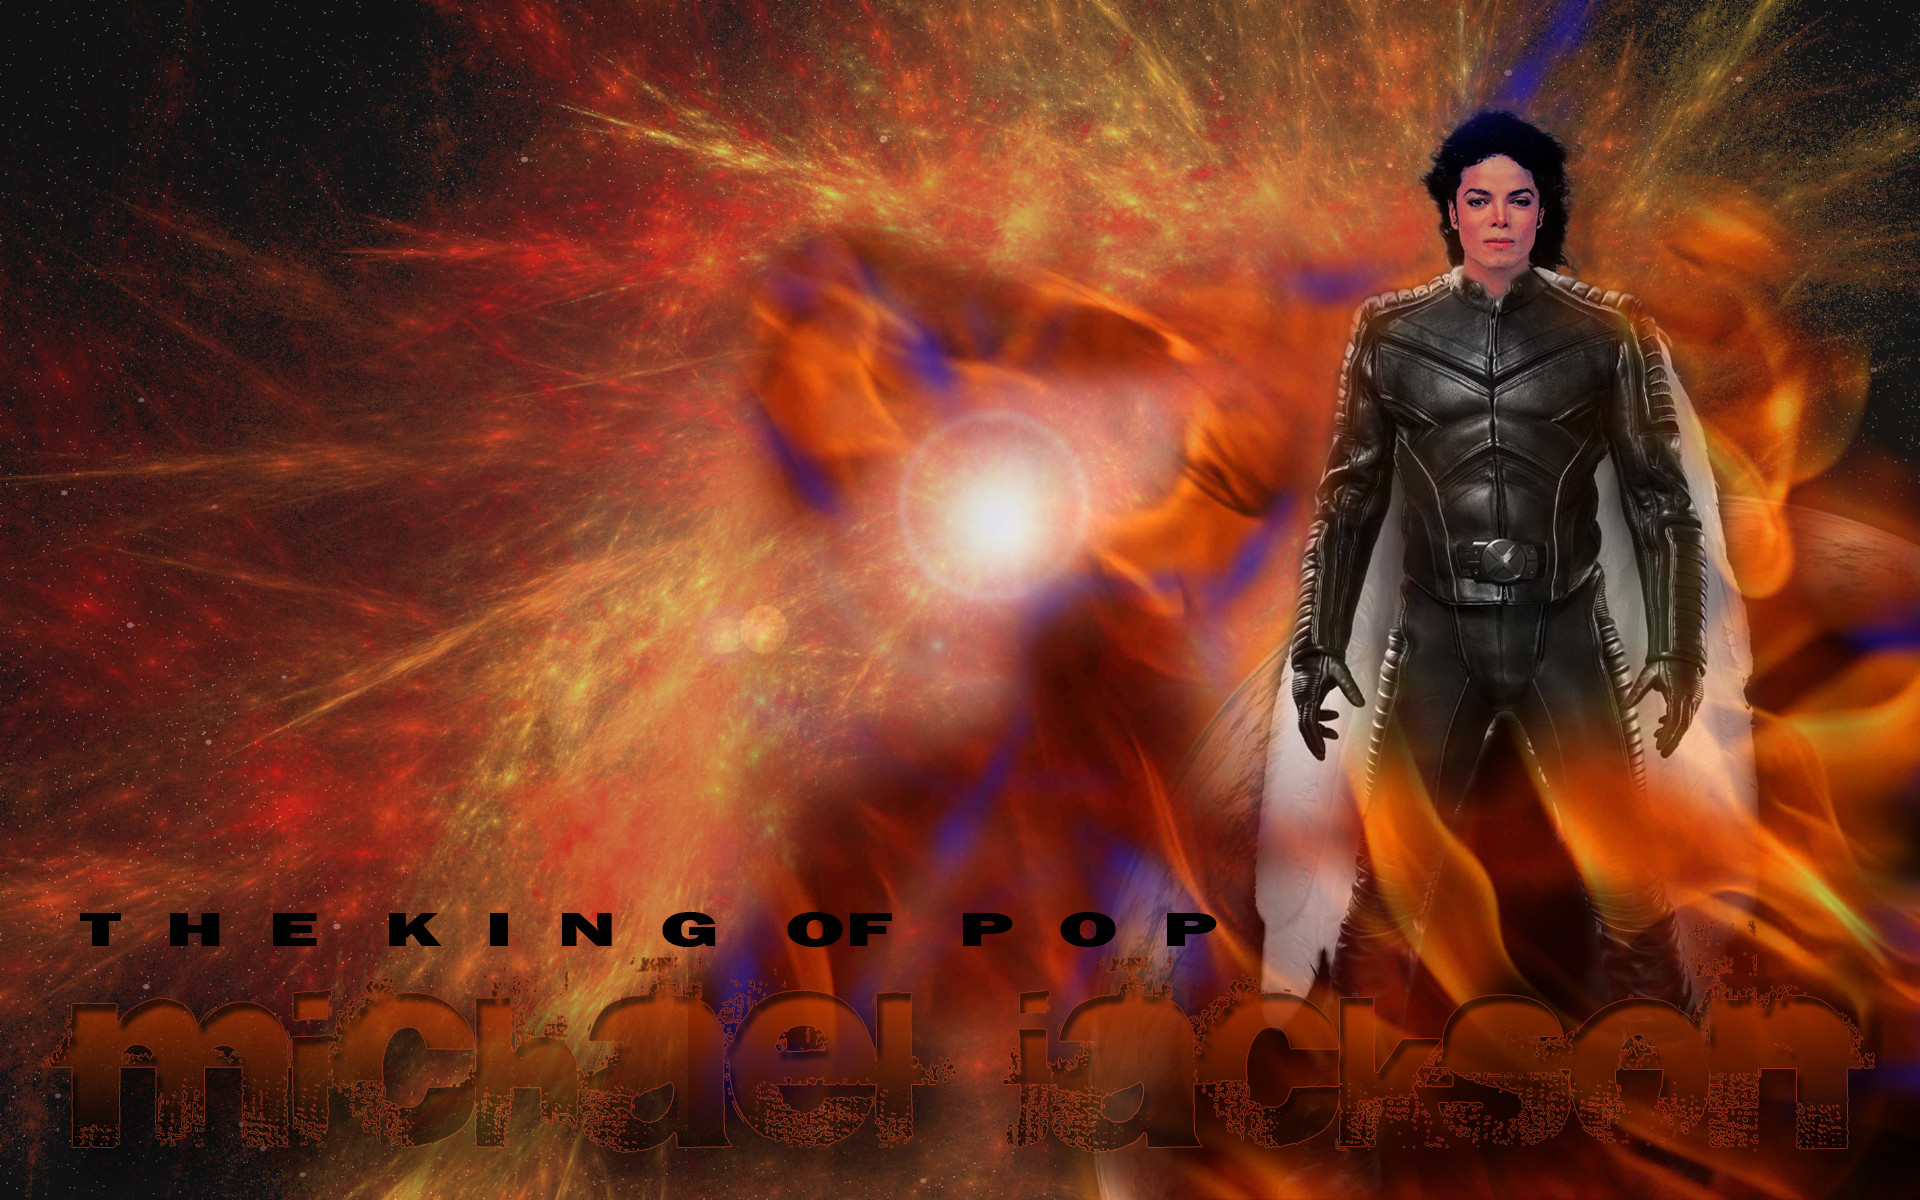 1920x1200 Michael Jackson wallpaper. I don't know who made this, but he's an